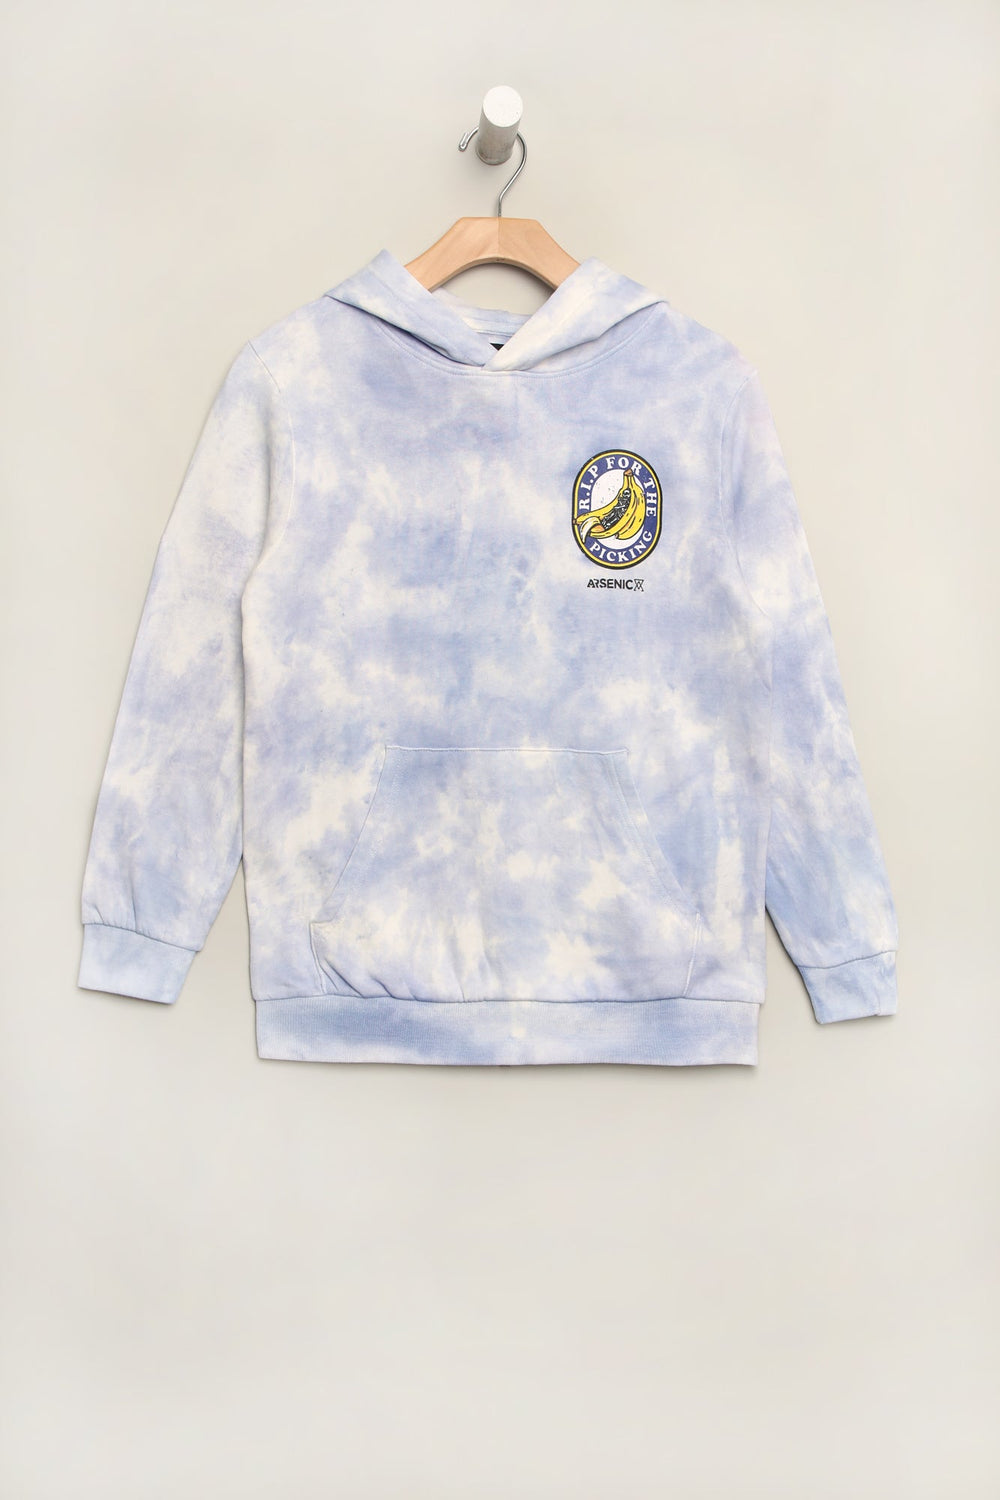 Arsenic Youth R.I.P For The Picking Tie-Dye Hoodie Arsenic Youth R.I.P For The Picking Tie-Dye Hoodie